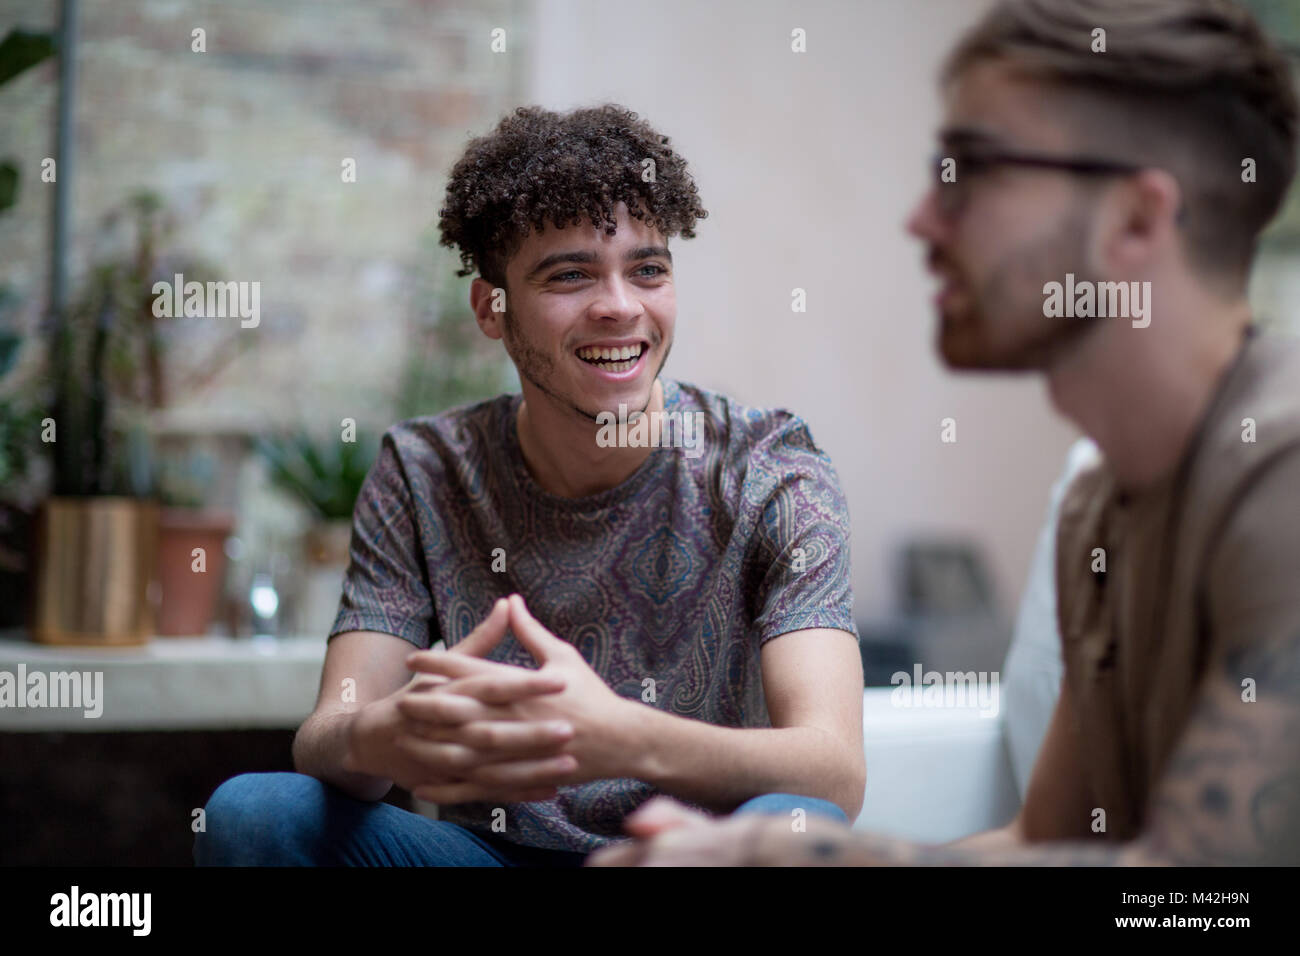 Young adult male with friend Stock Photo